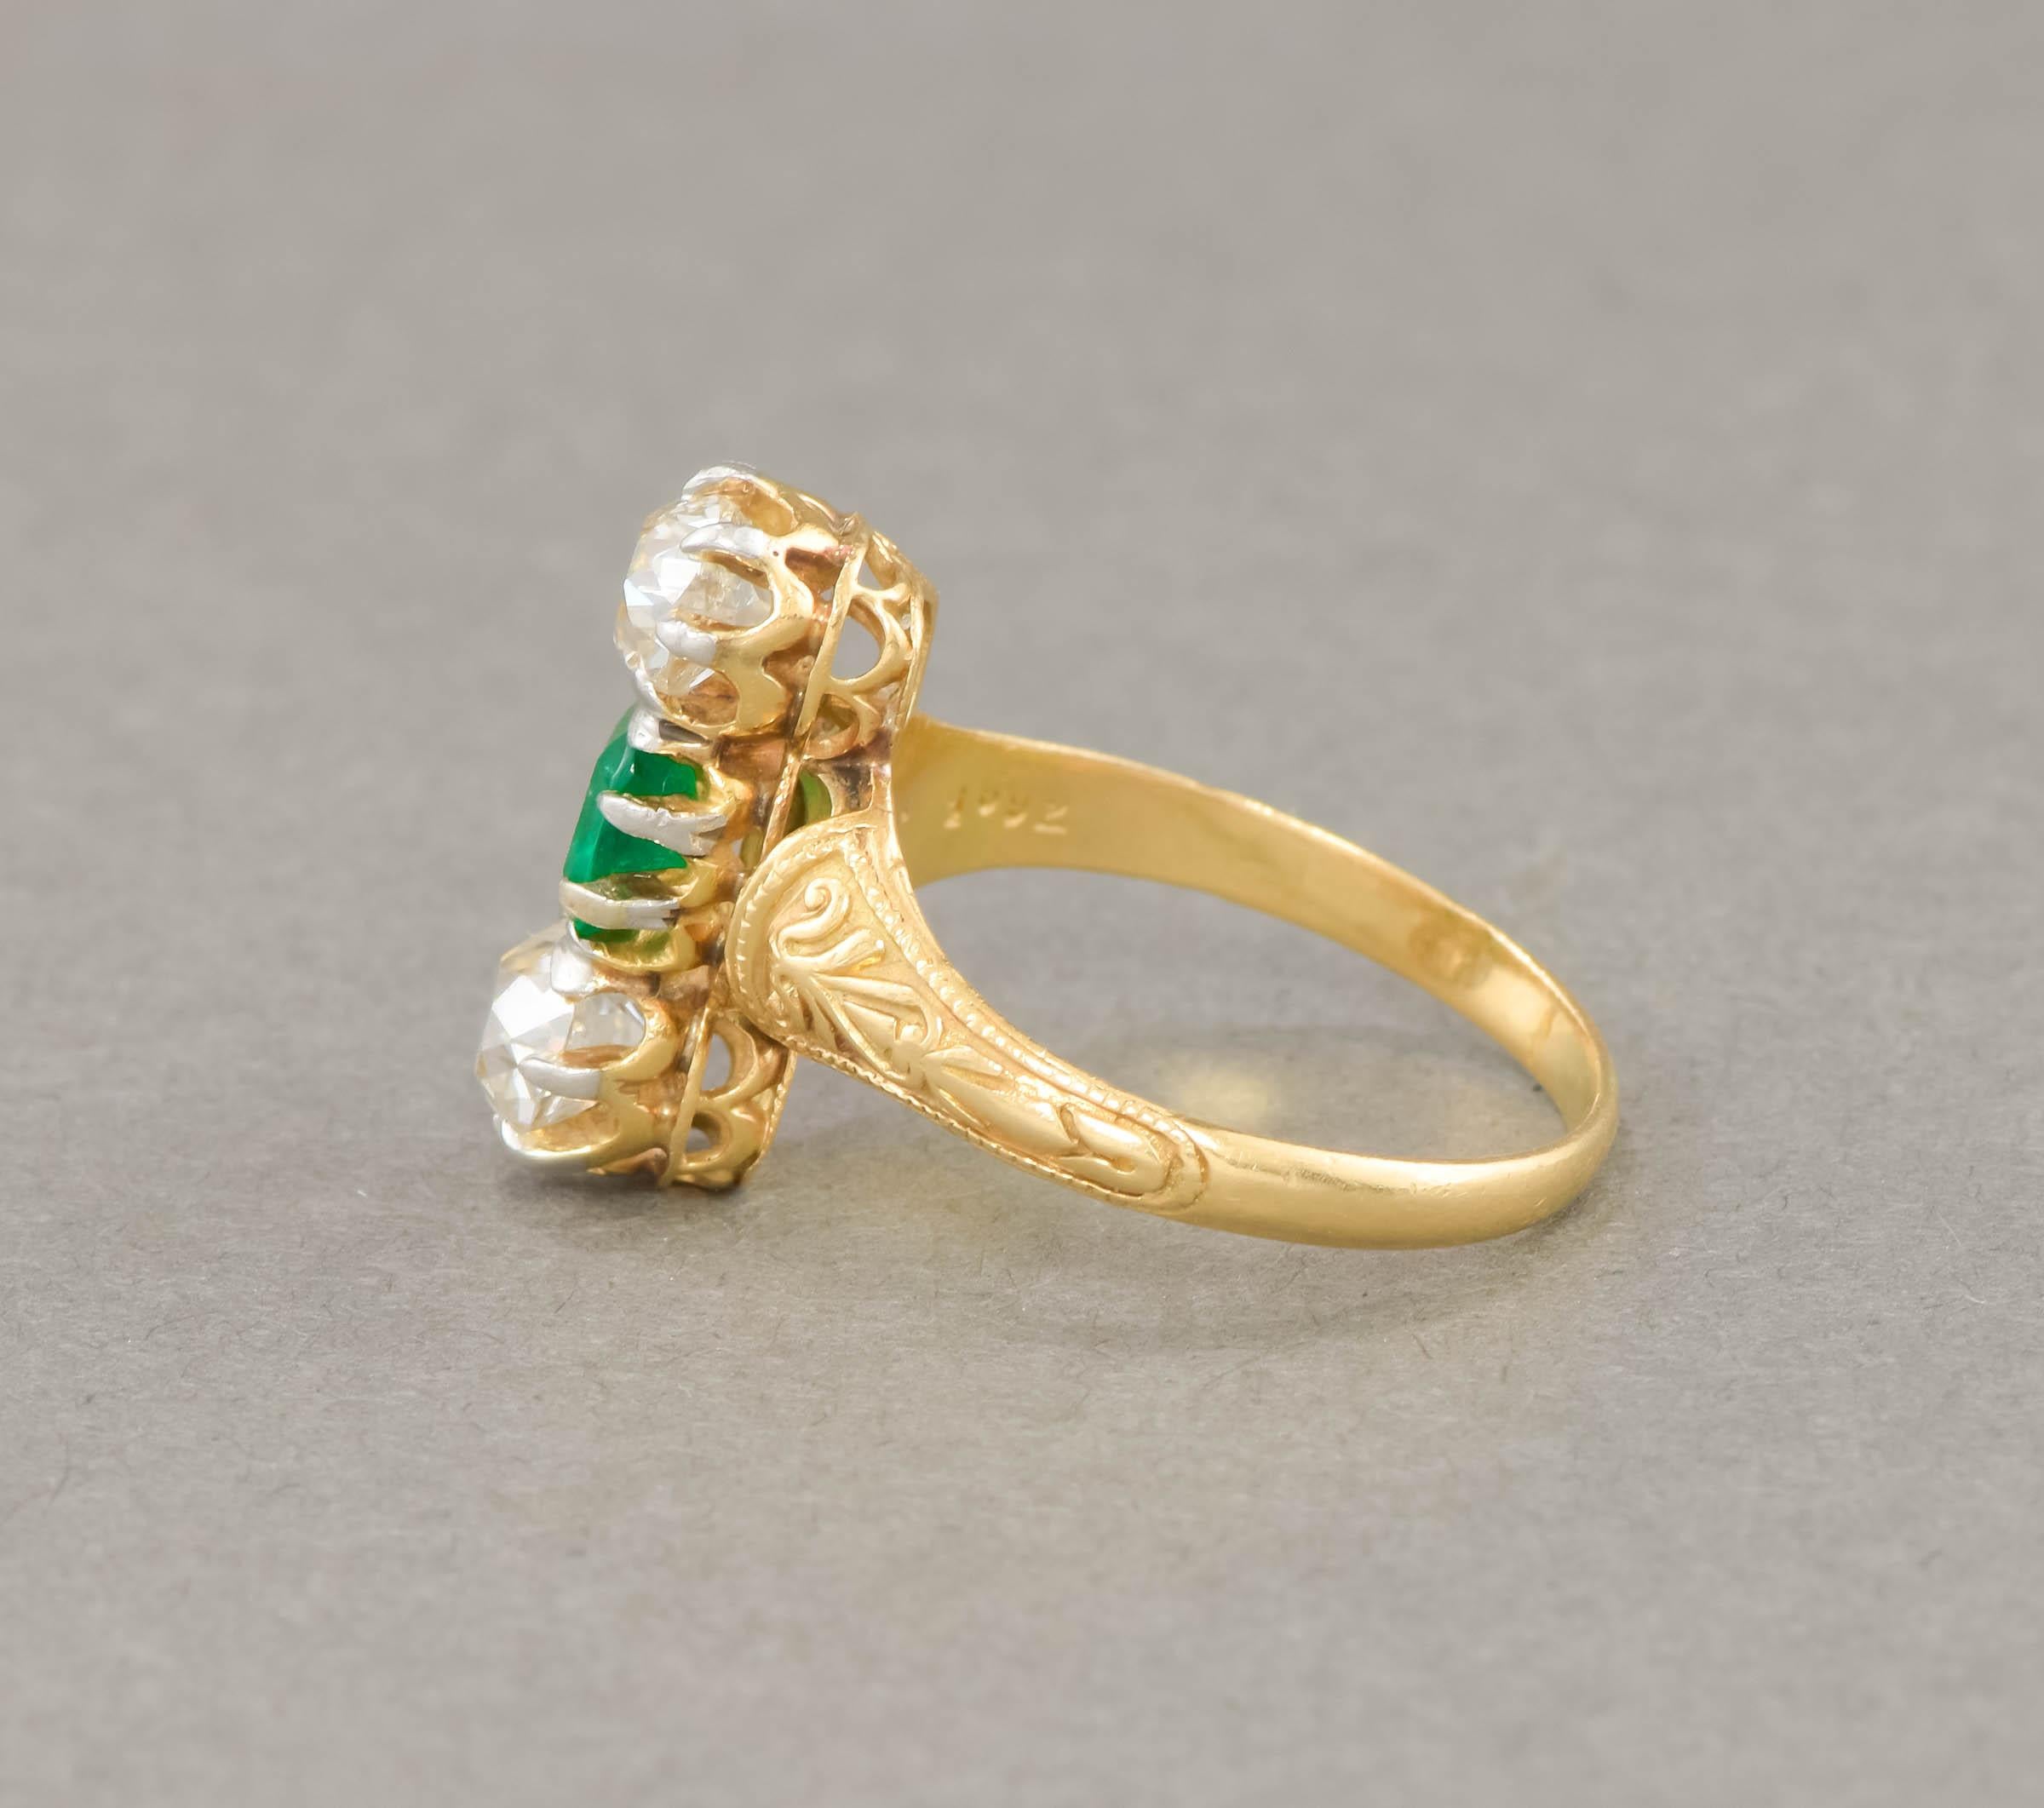 Antique Old Mine Cut Diamond & Emerald Ring in 18K Gold In Good Condition For Sale In Danvers, MA